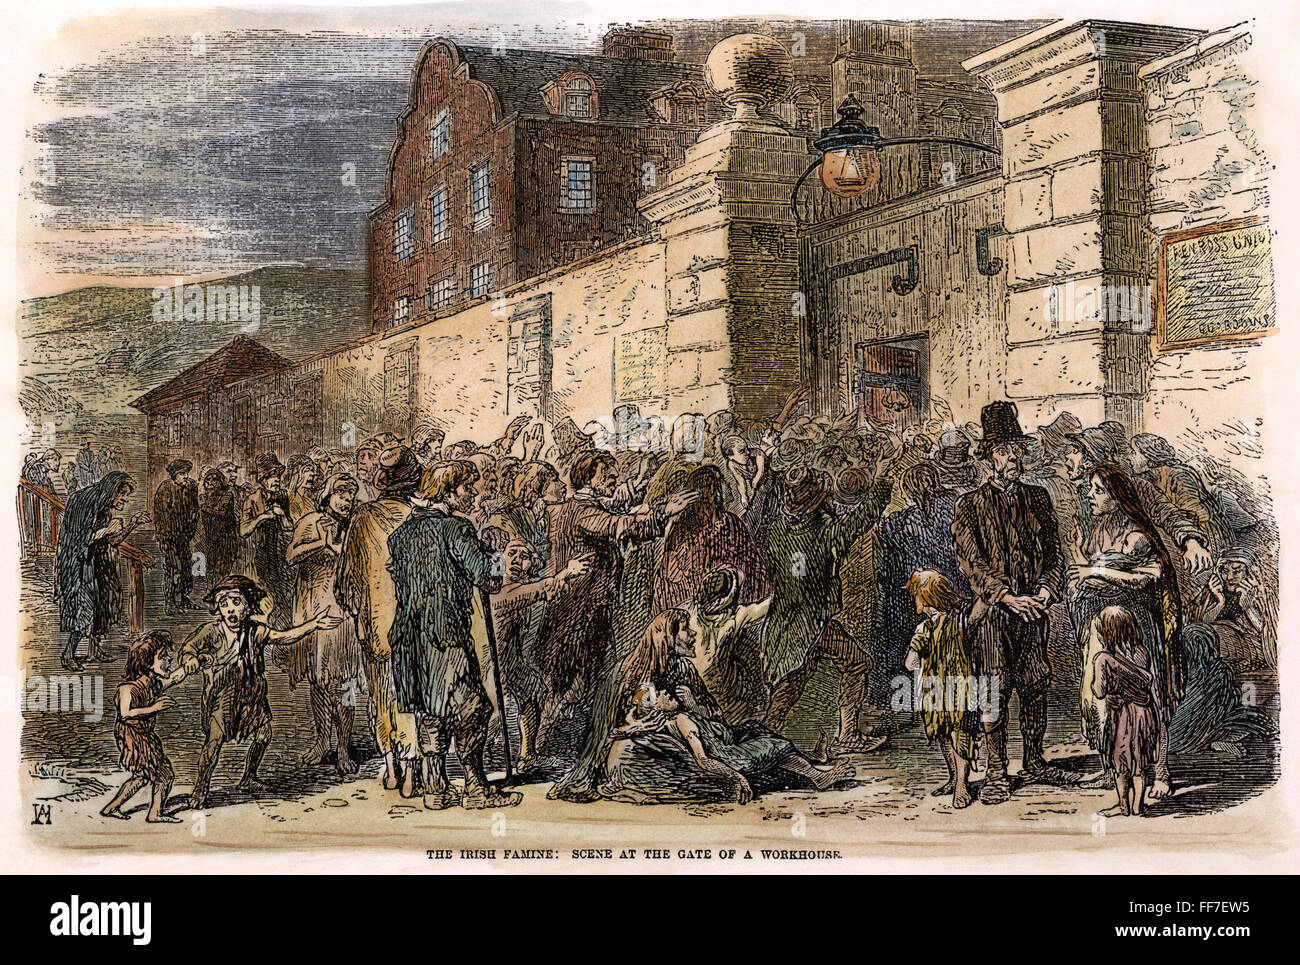 POTATO FAMINE./nStarving peasants beseiging a workhouse gate in Ireland in the aftermath of the Great Potato Famine of 1846-47. Contemporary engraving. Stock Photo